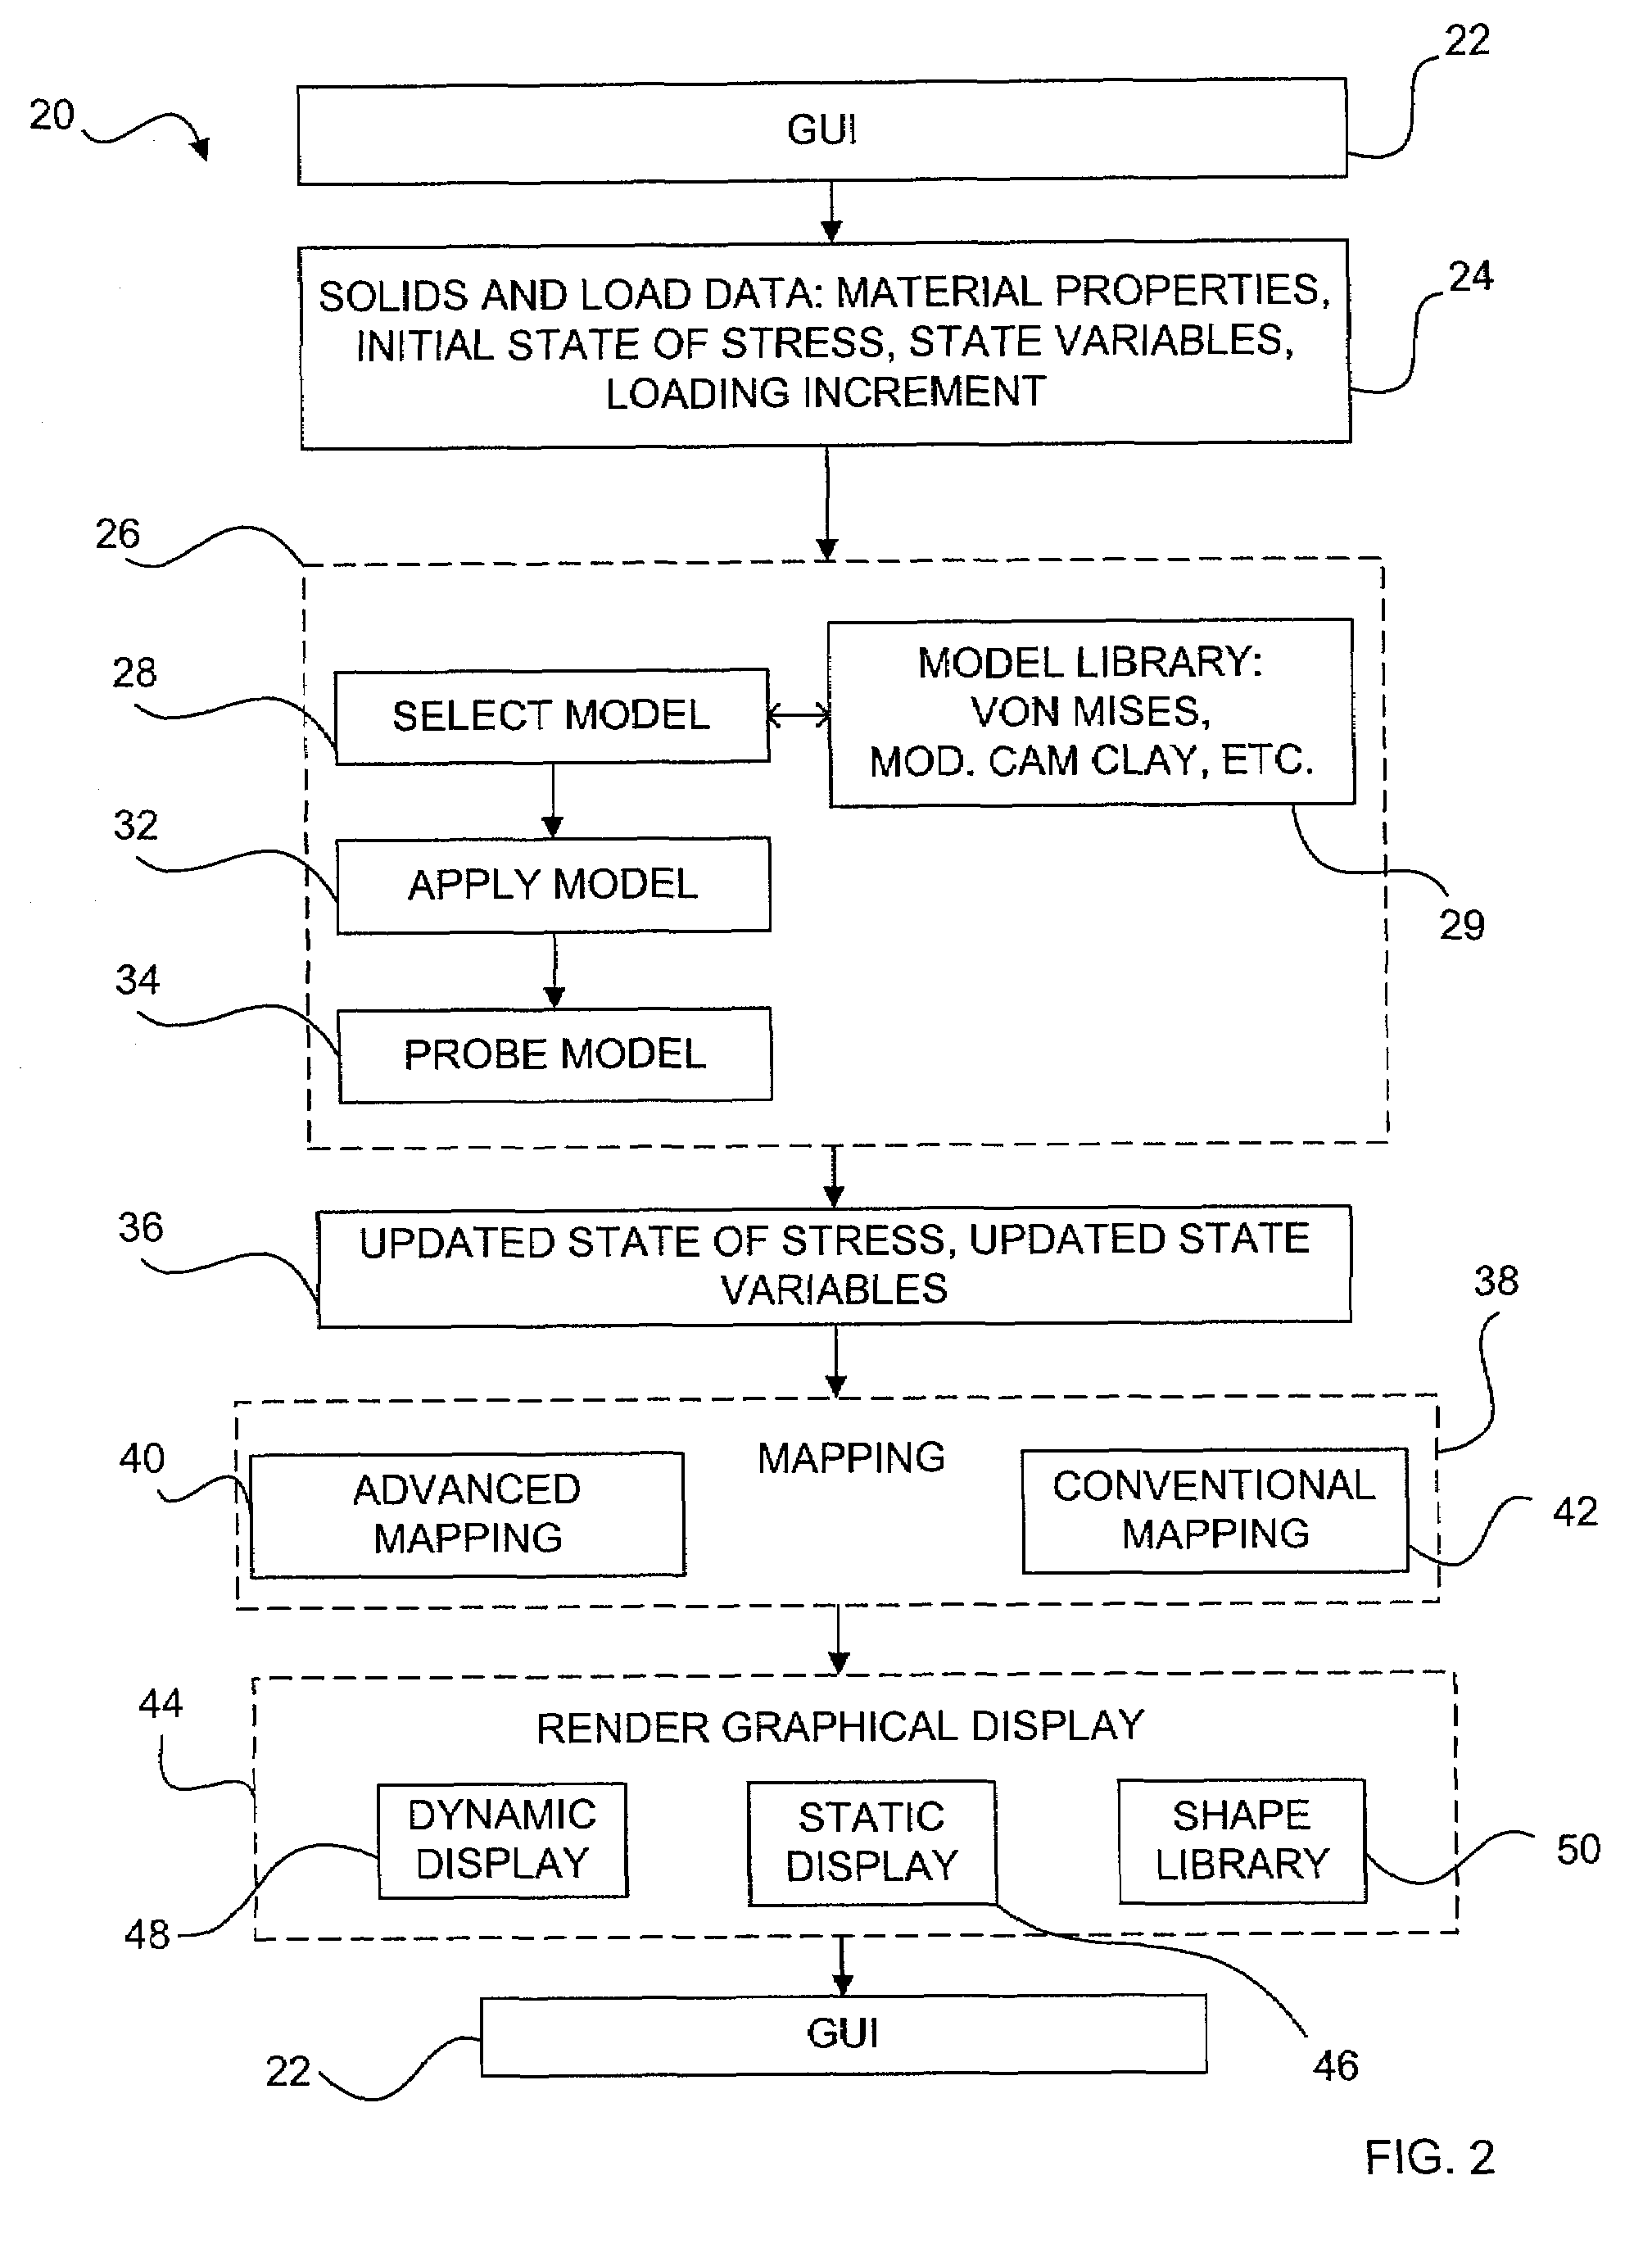 Method and program product for solid mechanics modelling workbench and dynamic display